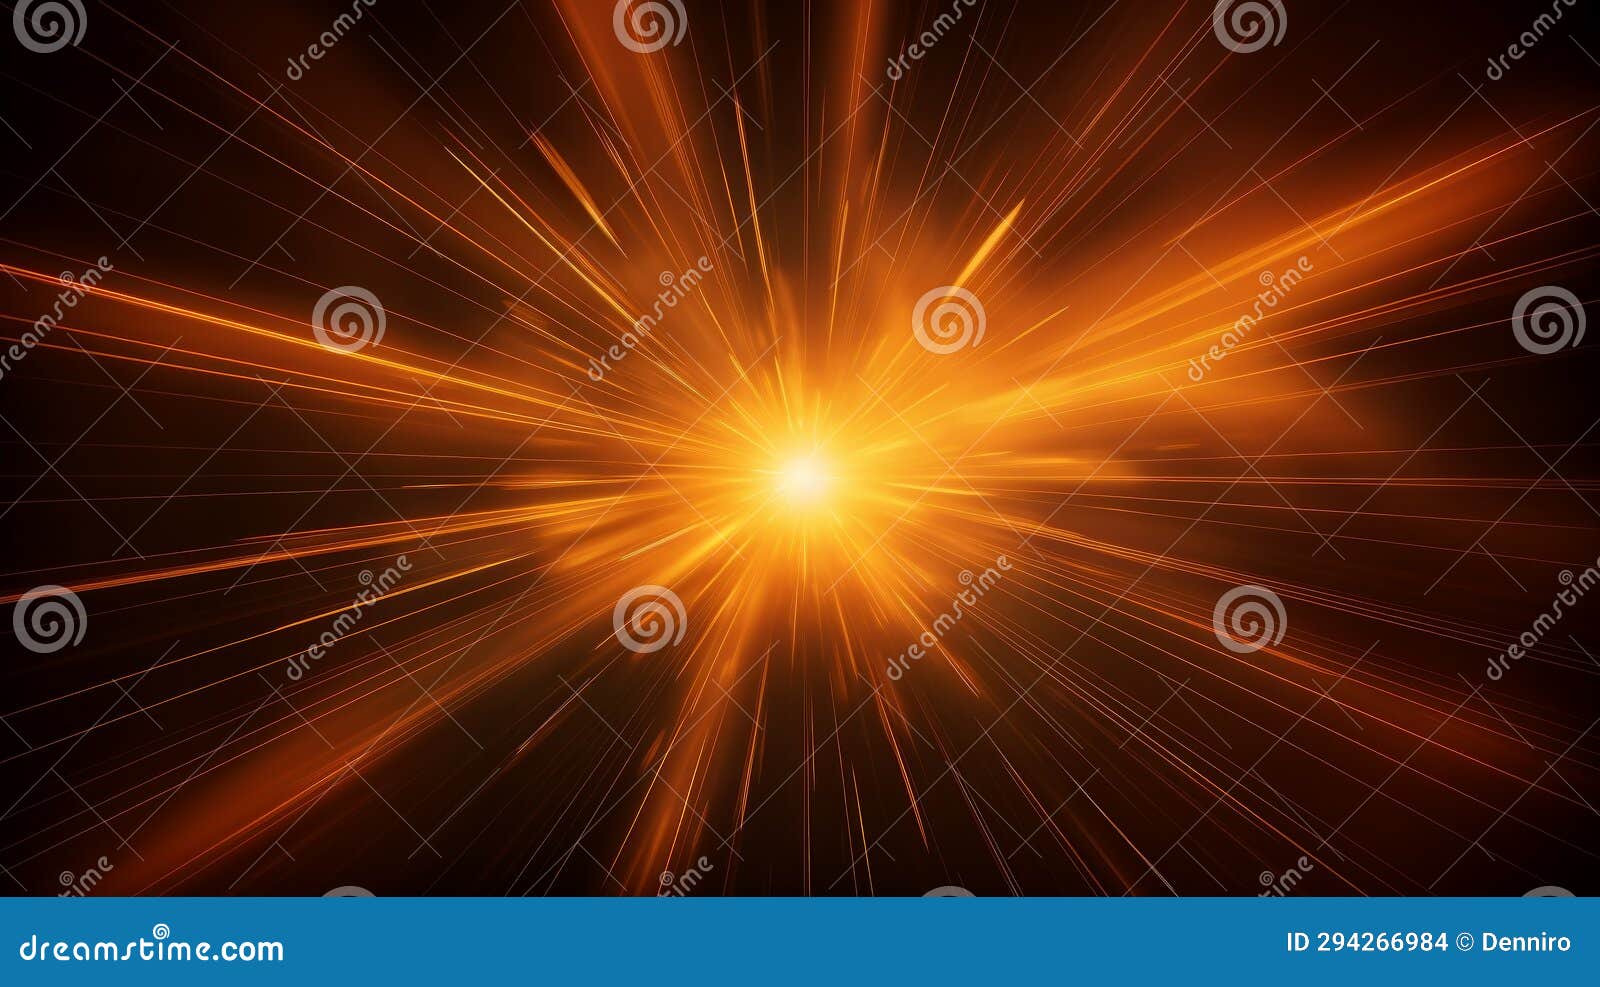 abstract background with sun outburst with rays of light